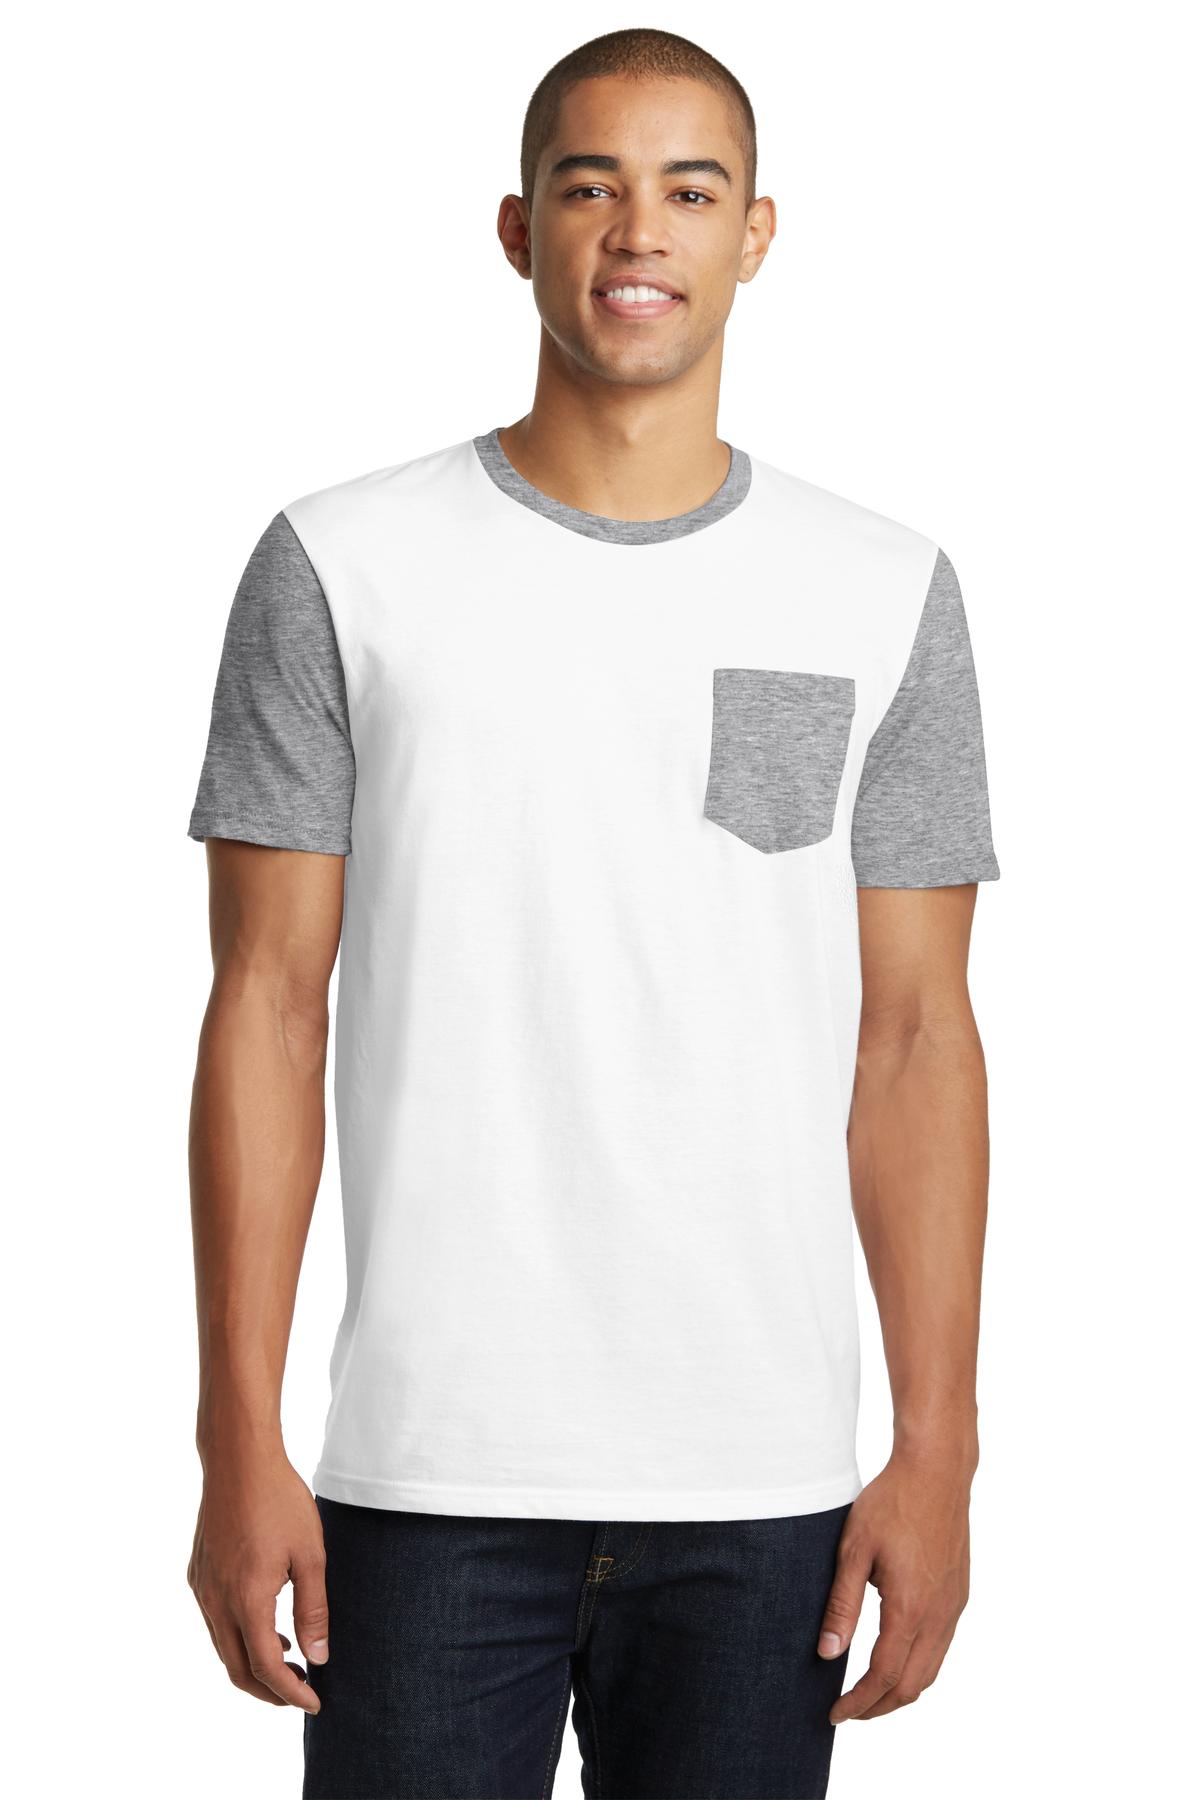 District  DT6000SP - Young Mens Very Important Tee  with Contrast Sleeves and Pocket